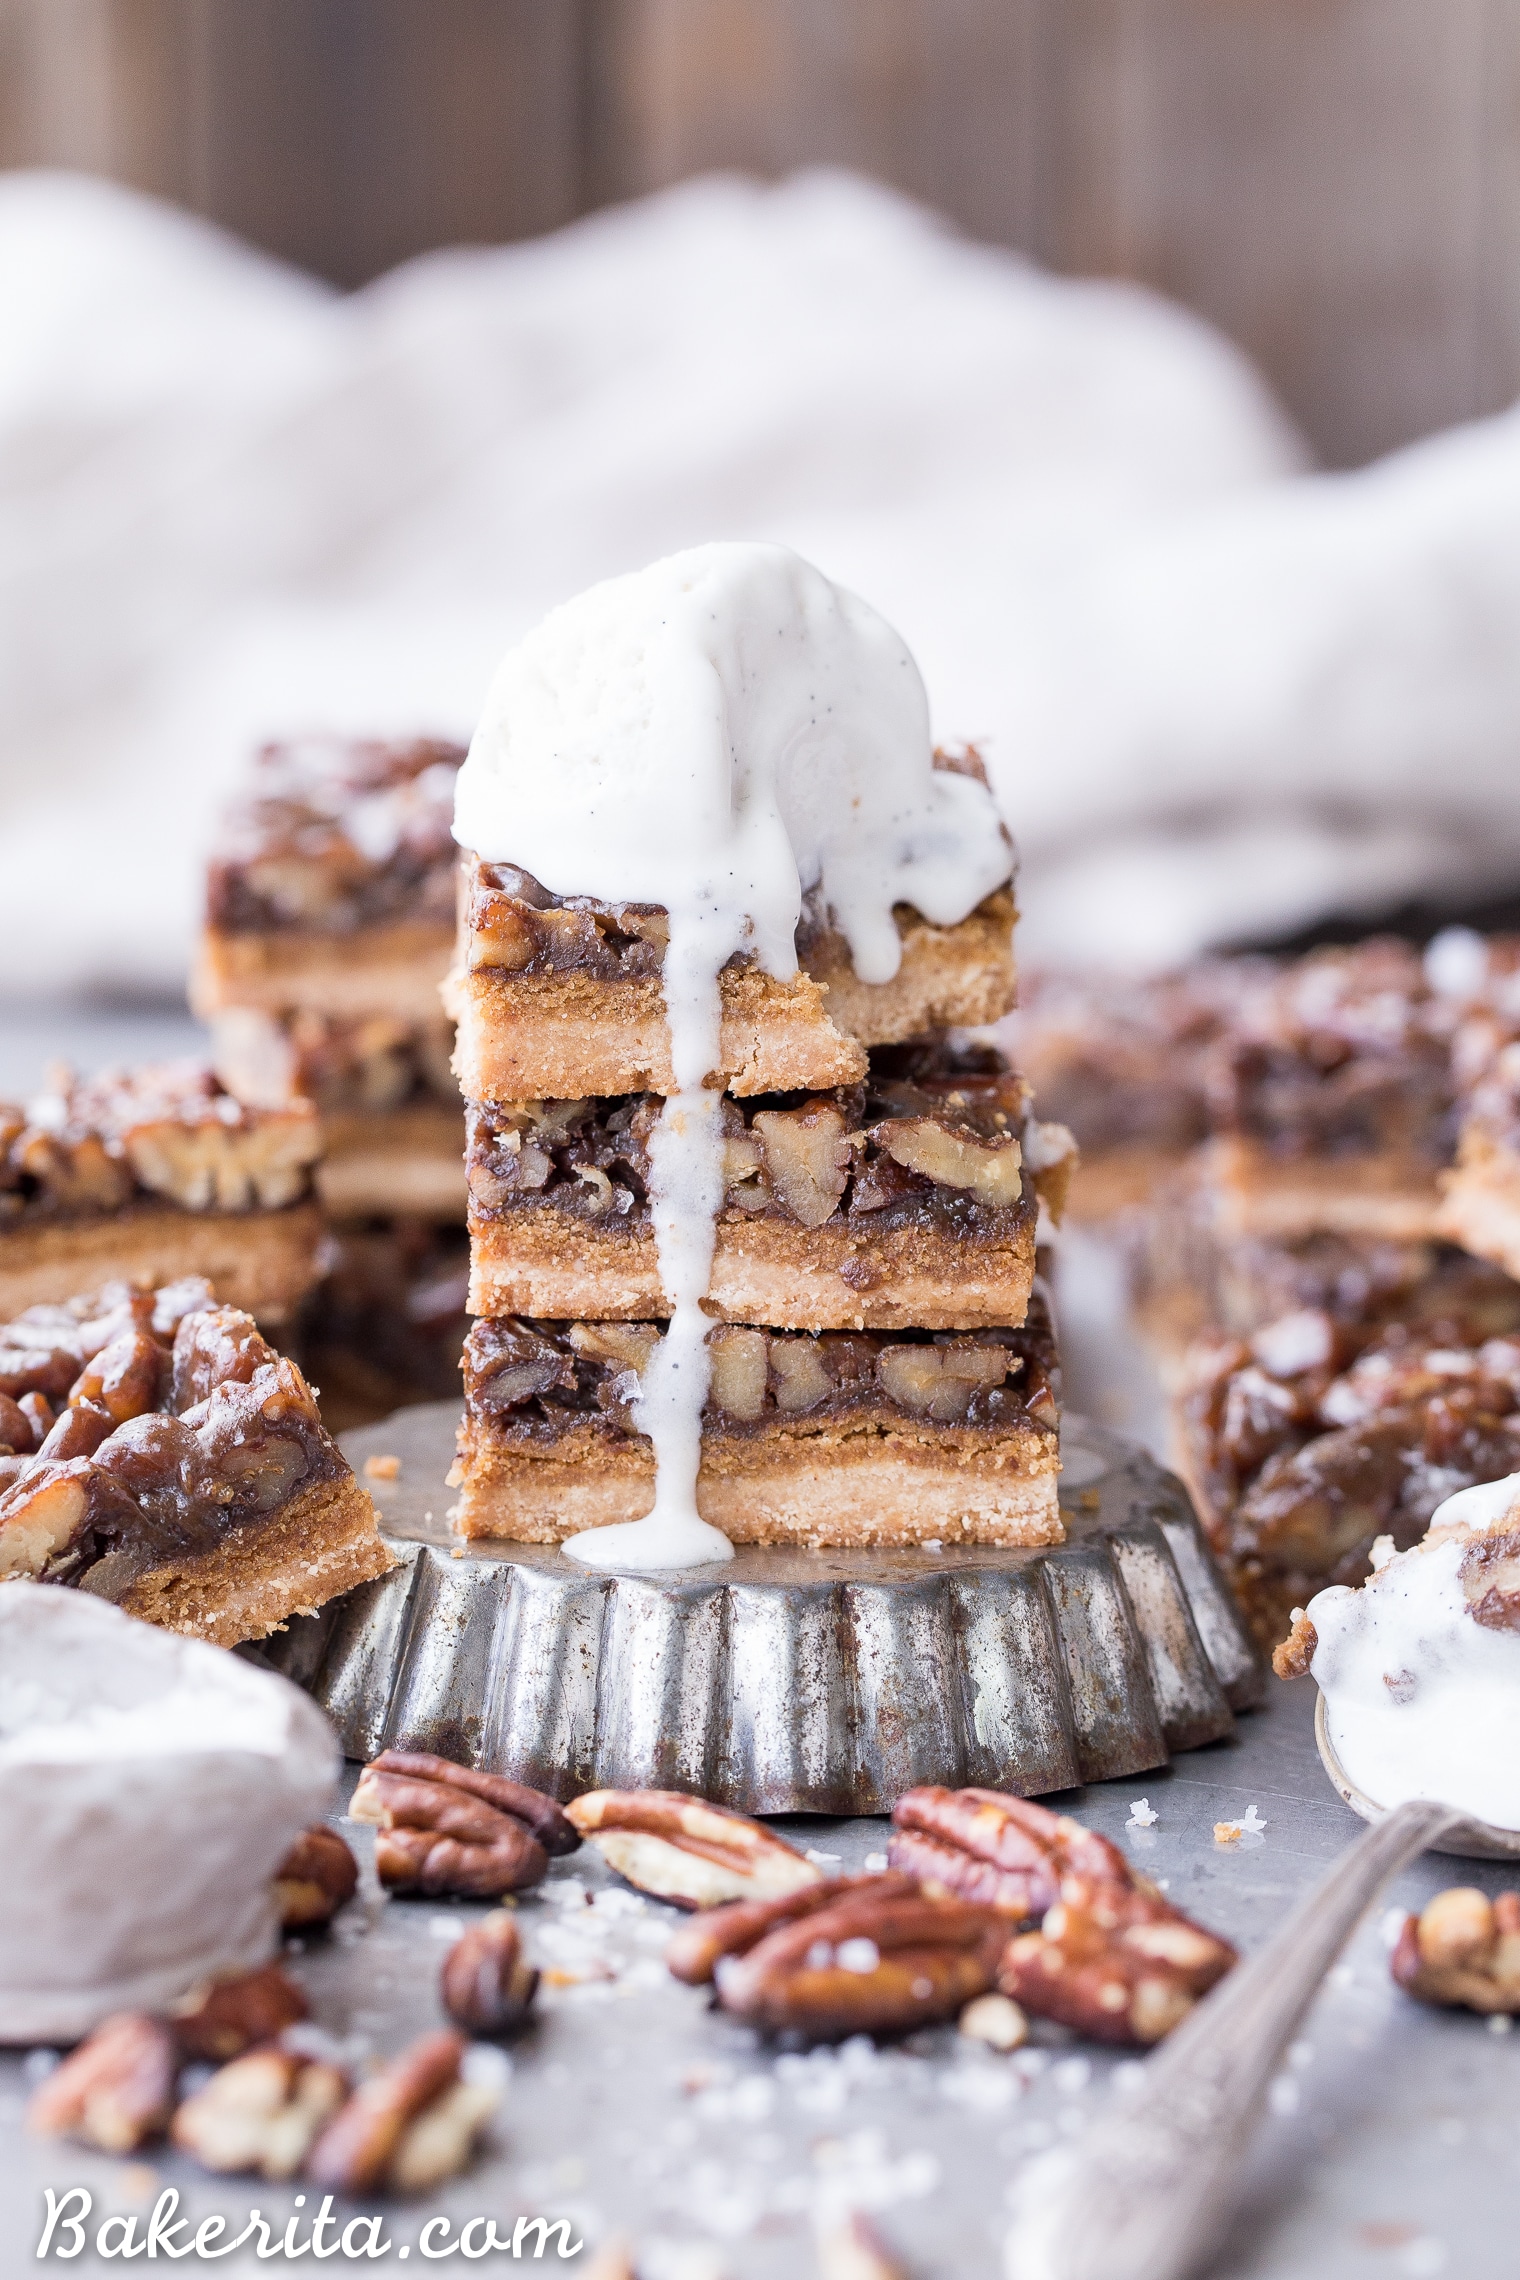 These Pecan Pie Bars are thick and caramelly, with a crispy coconut flour shortbread crust and a gooey pecan pie filling on top. These gluten-free, paleo, and vegan bars will be the star of your dessert spread!